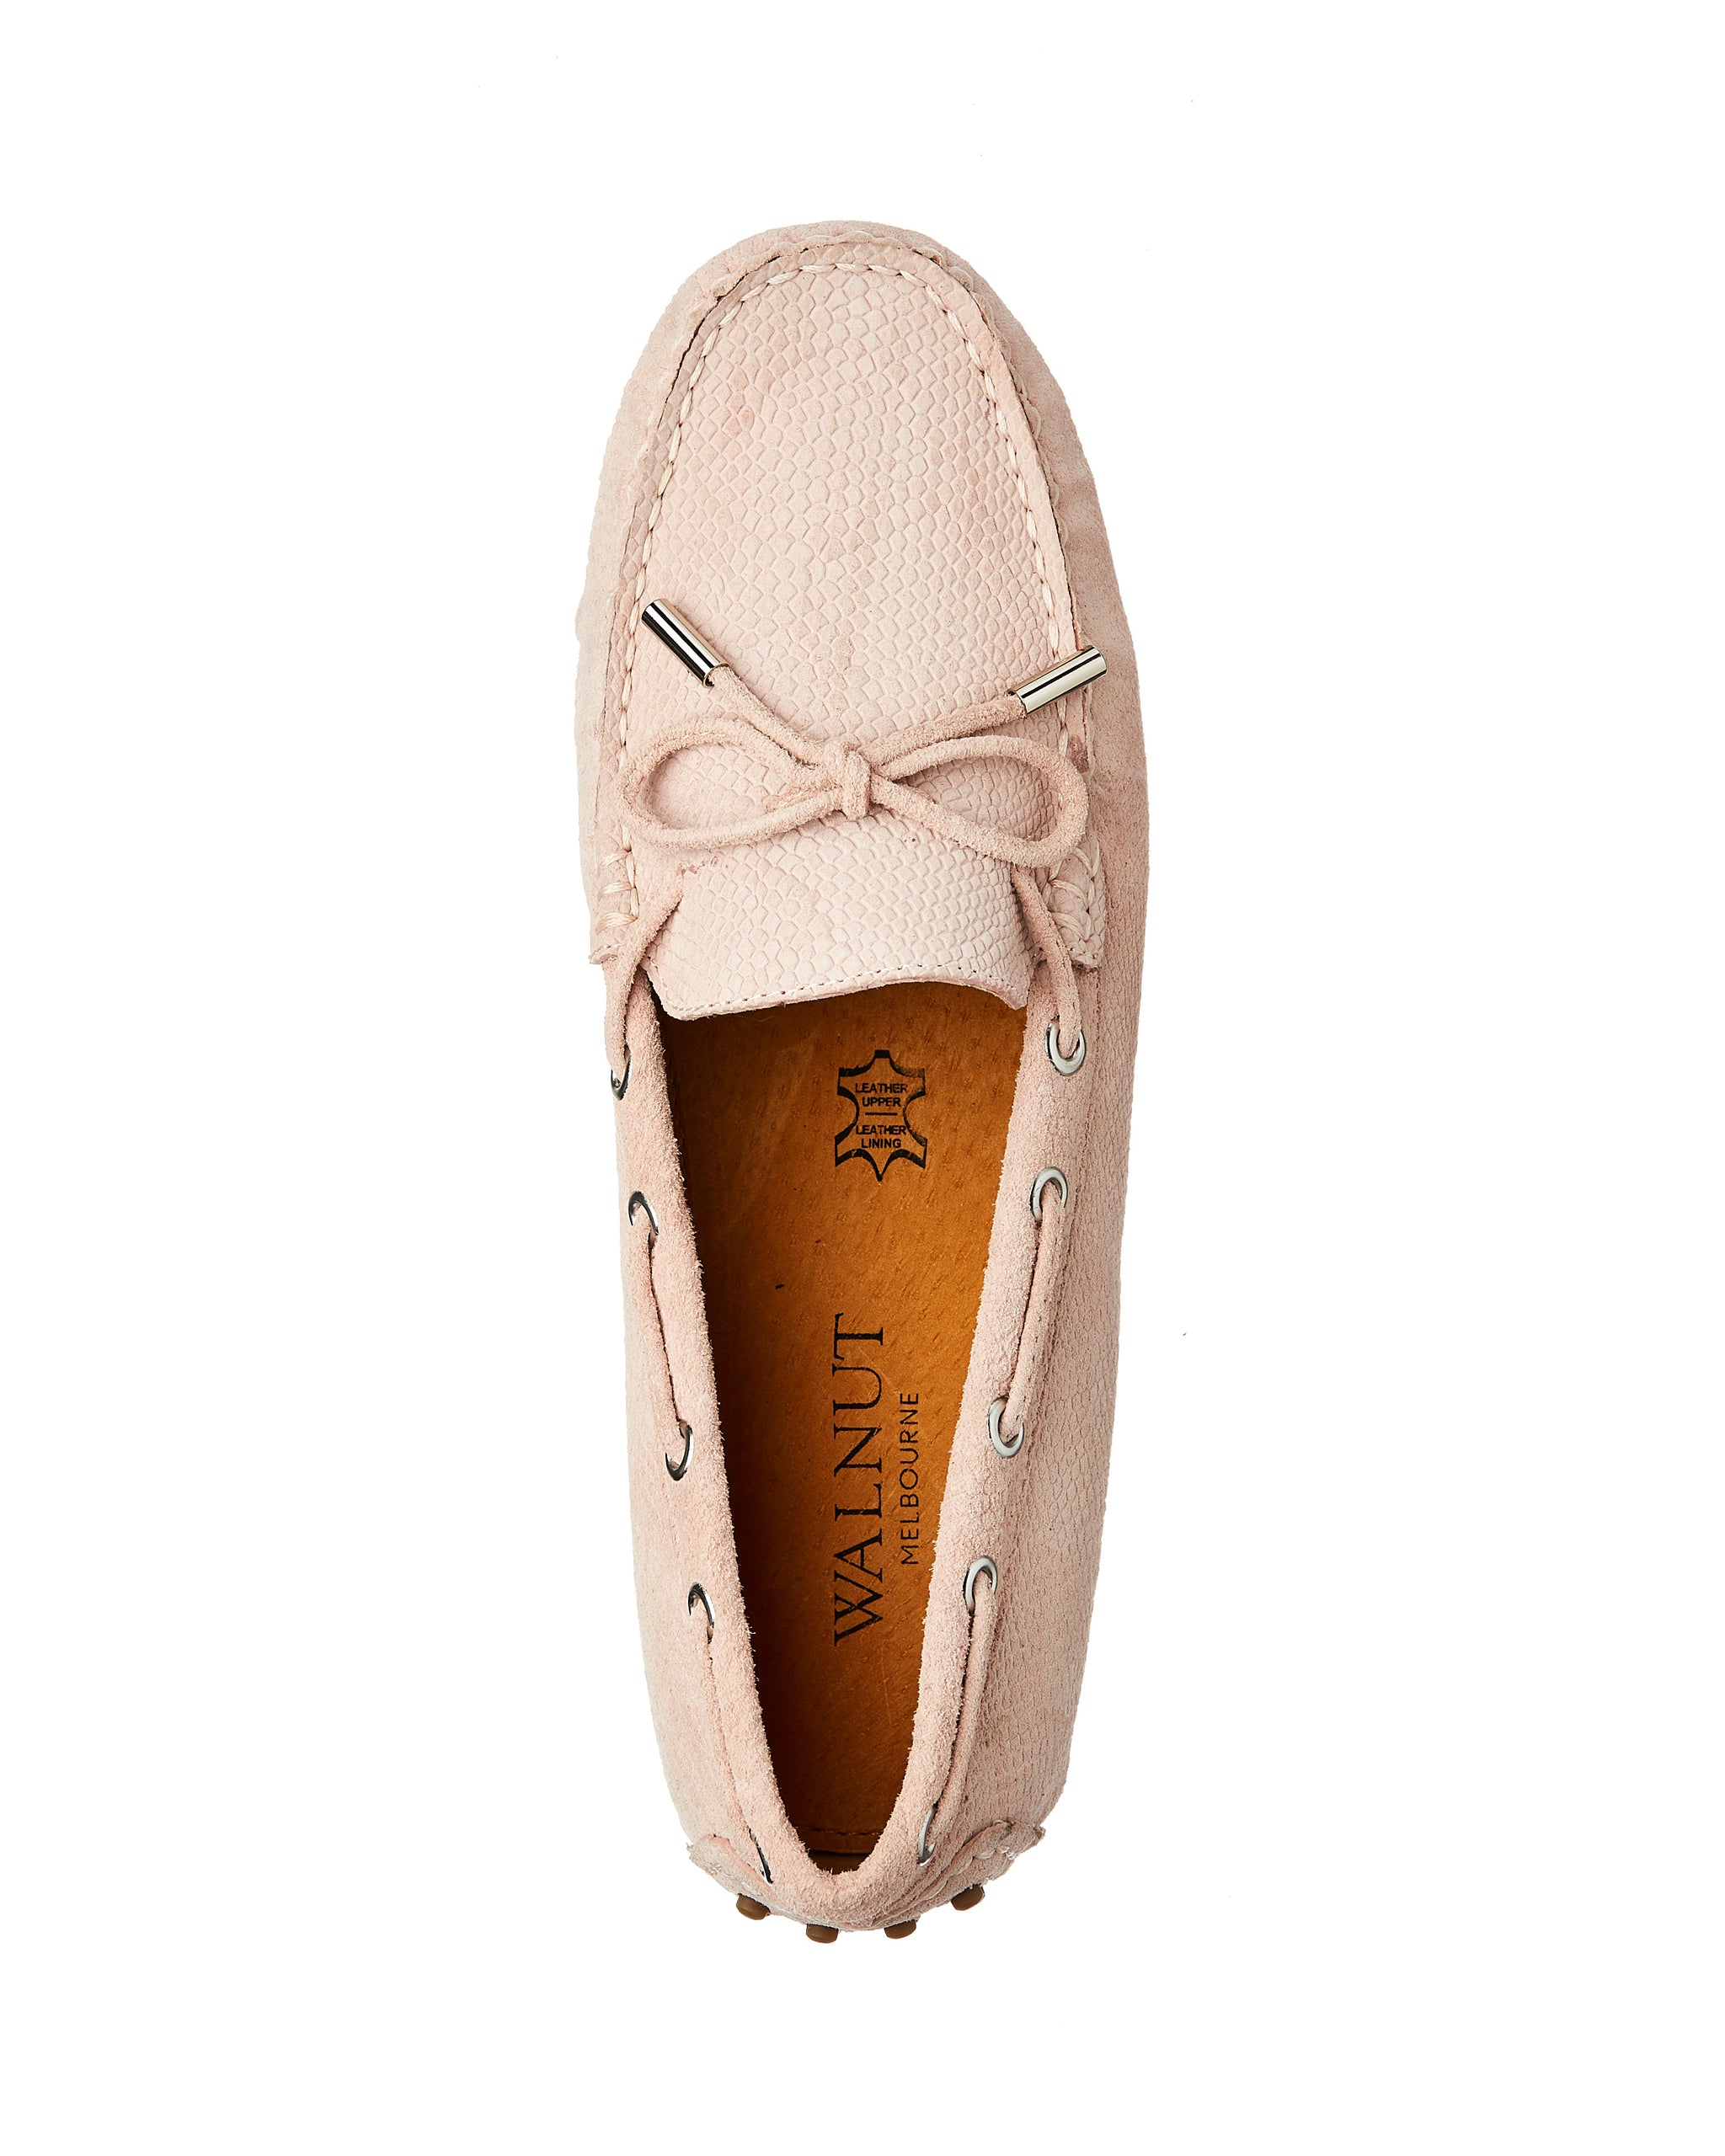 Daria Suede Mini Snake Loafer Tan side view